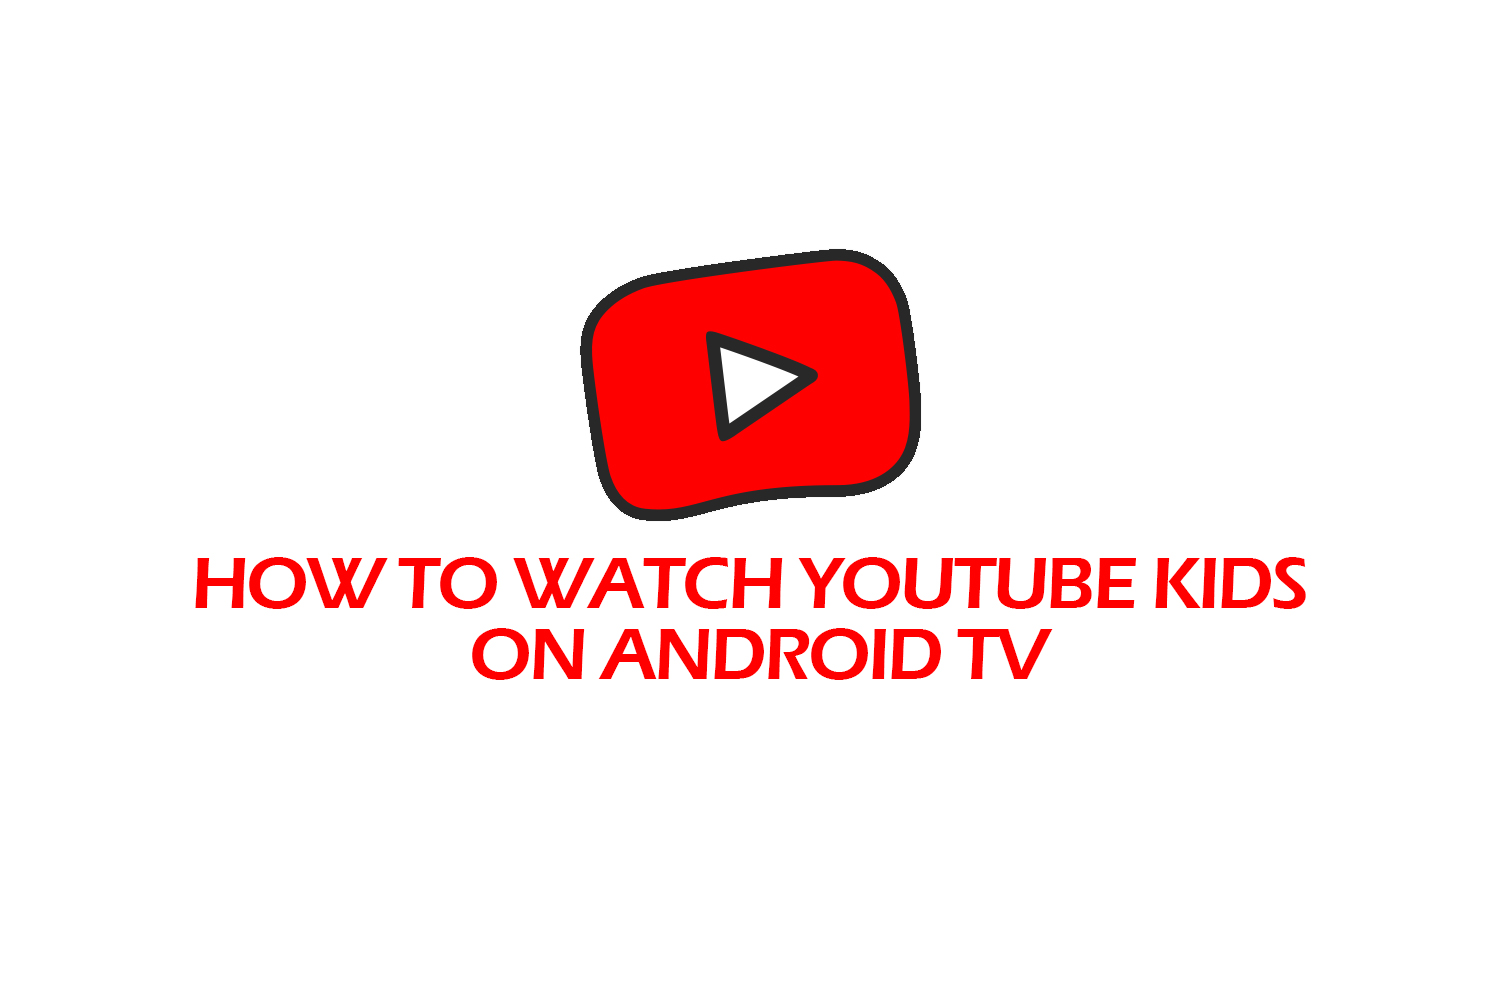 HOW TO WATCH YOUTUBE KIDS ON ANDROID TV